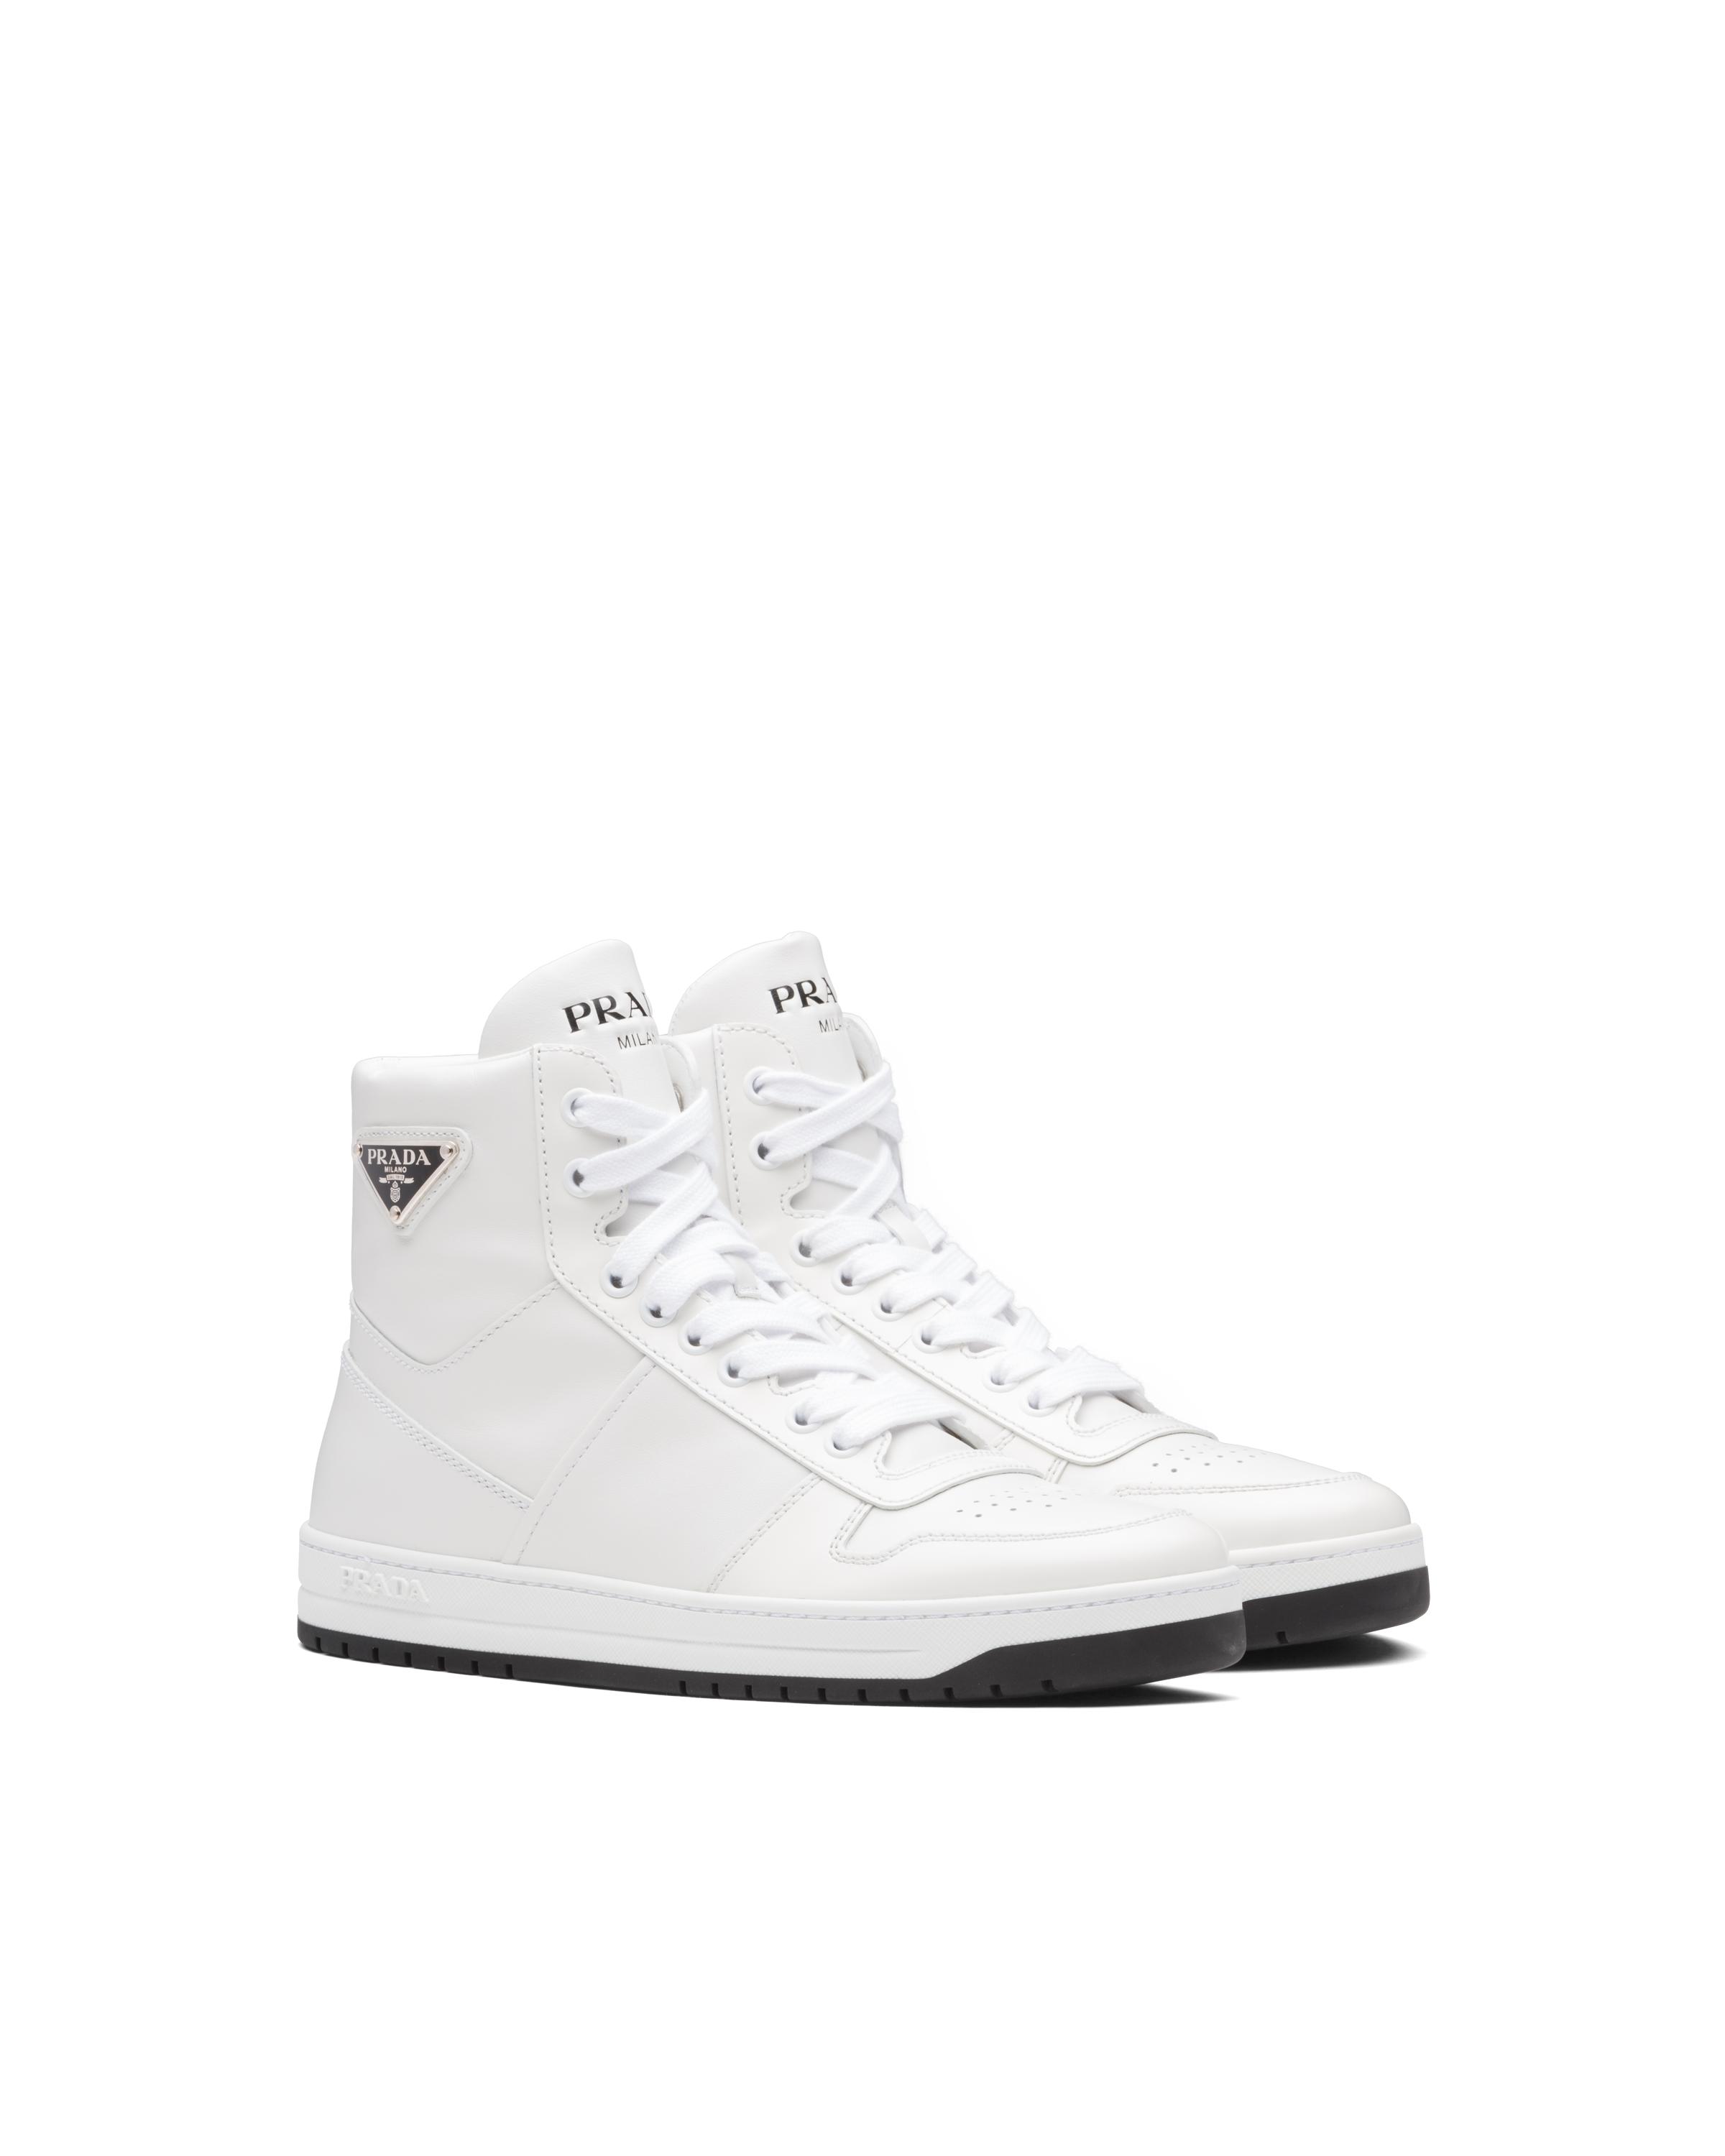 Prada Downtown Perforated Leather High-top Sneakers in White | Lyst